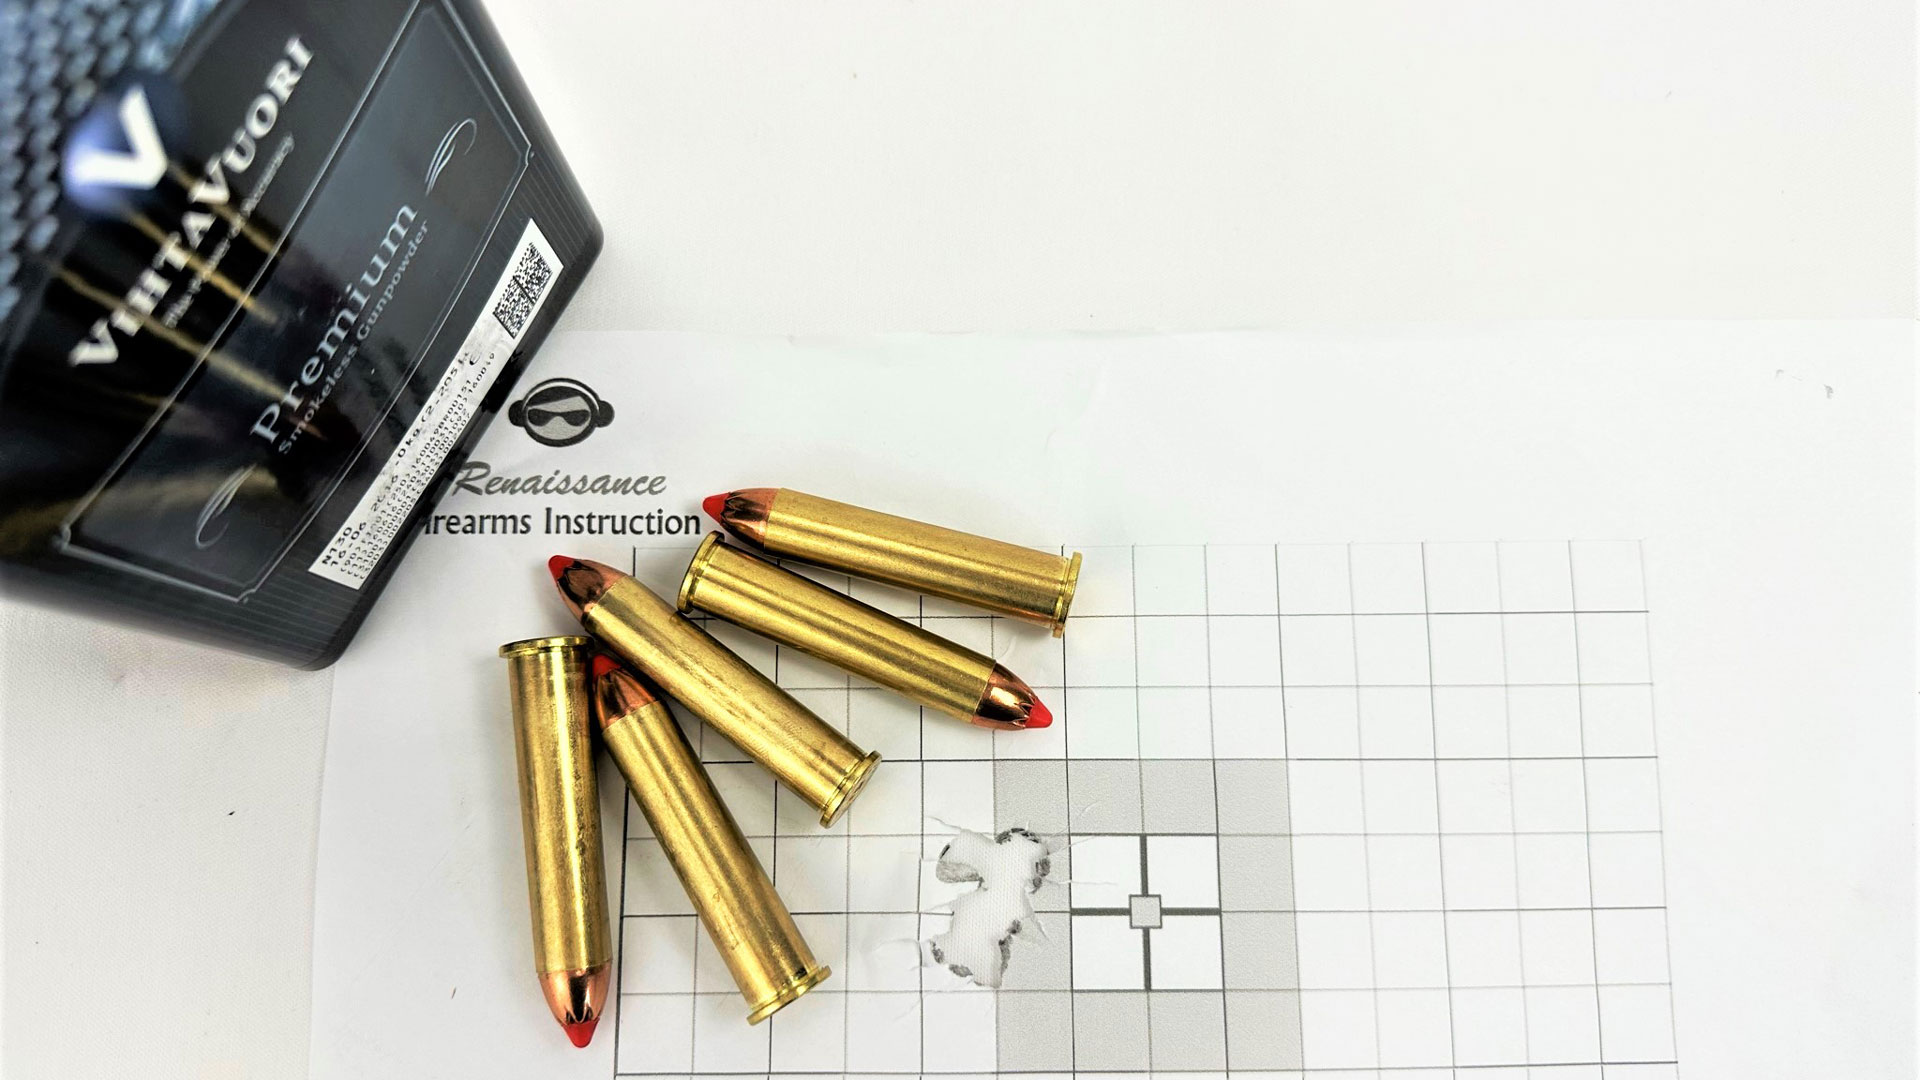 New Brass Cases for Reloading - Budget Shooter Supply